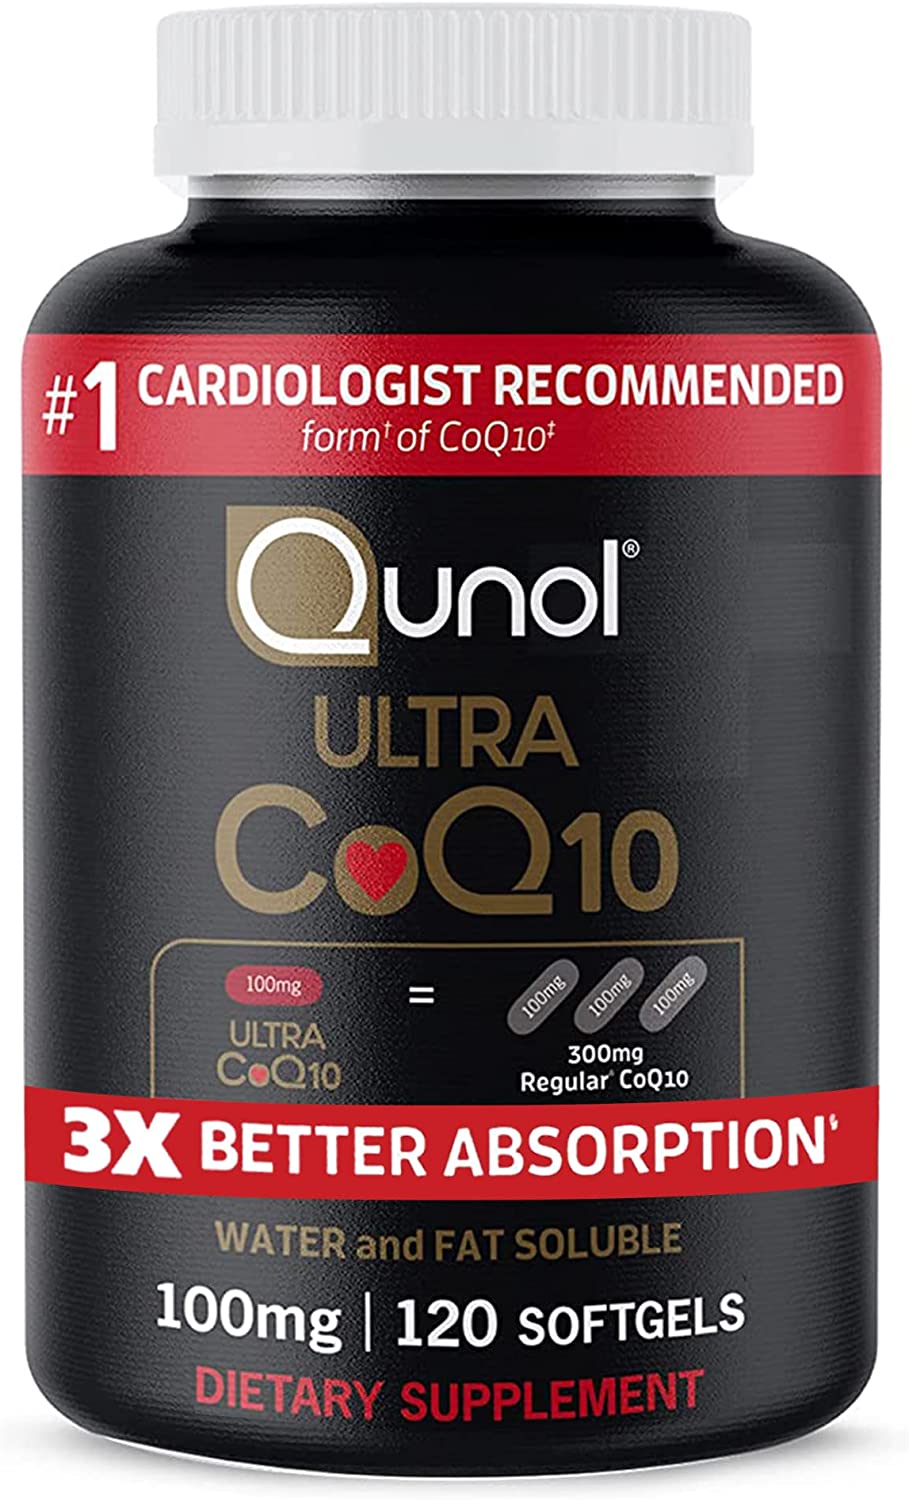 CoQ10 100mg Softgels - Qunol Ultra 3x Better Absorption Coenzyme Q10 Supplements - Antioxidant Supplement For Vascular And Heart Health & Energy Production - 4 Month Supply - (Pack of 24, 2880 Count)